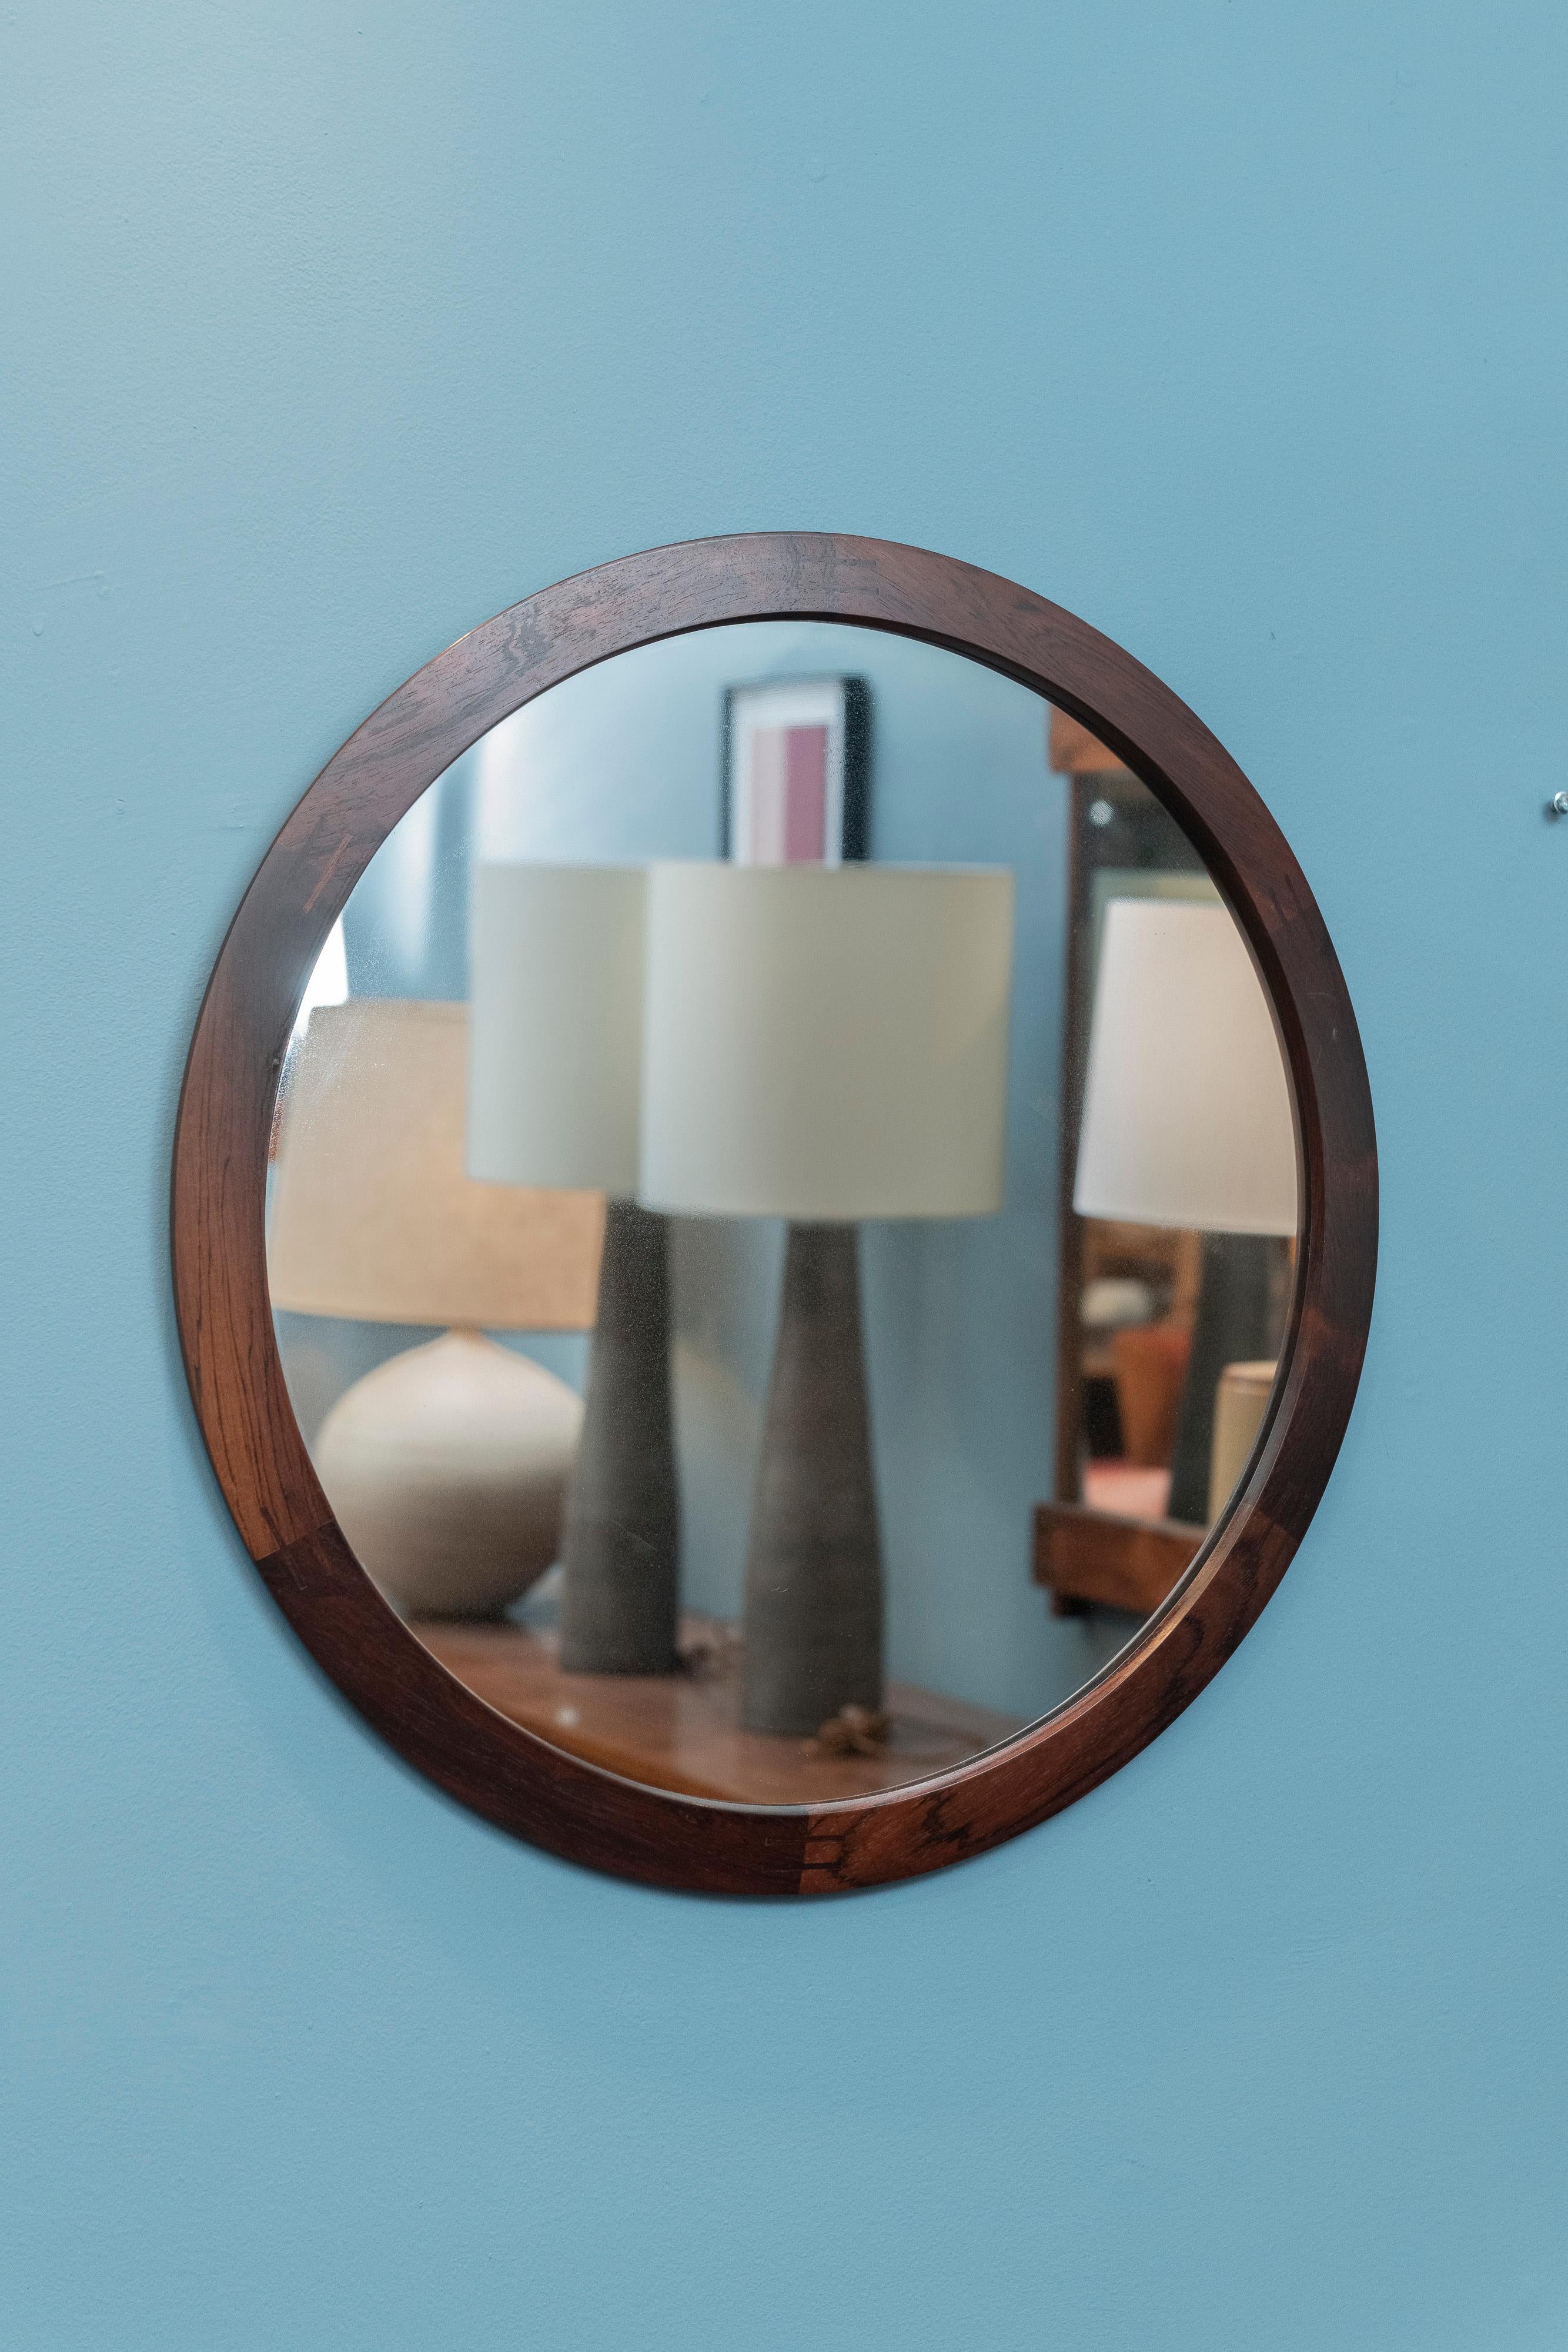 Aksel Kjersgaard design rosewood round wall mirror, model 280. Rare mirror in beautiful rosewood with inlaid joinery in very good original condition. Manufacturer's stamp on the back, produced by Odder of Denmark. It is ready to install and enjoy.